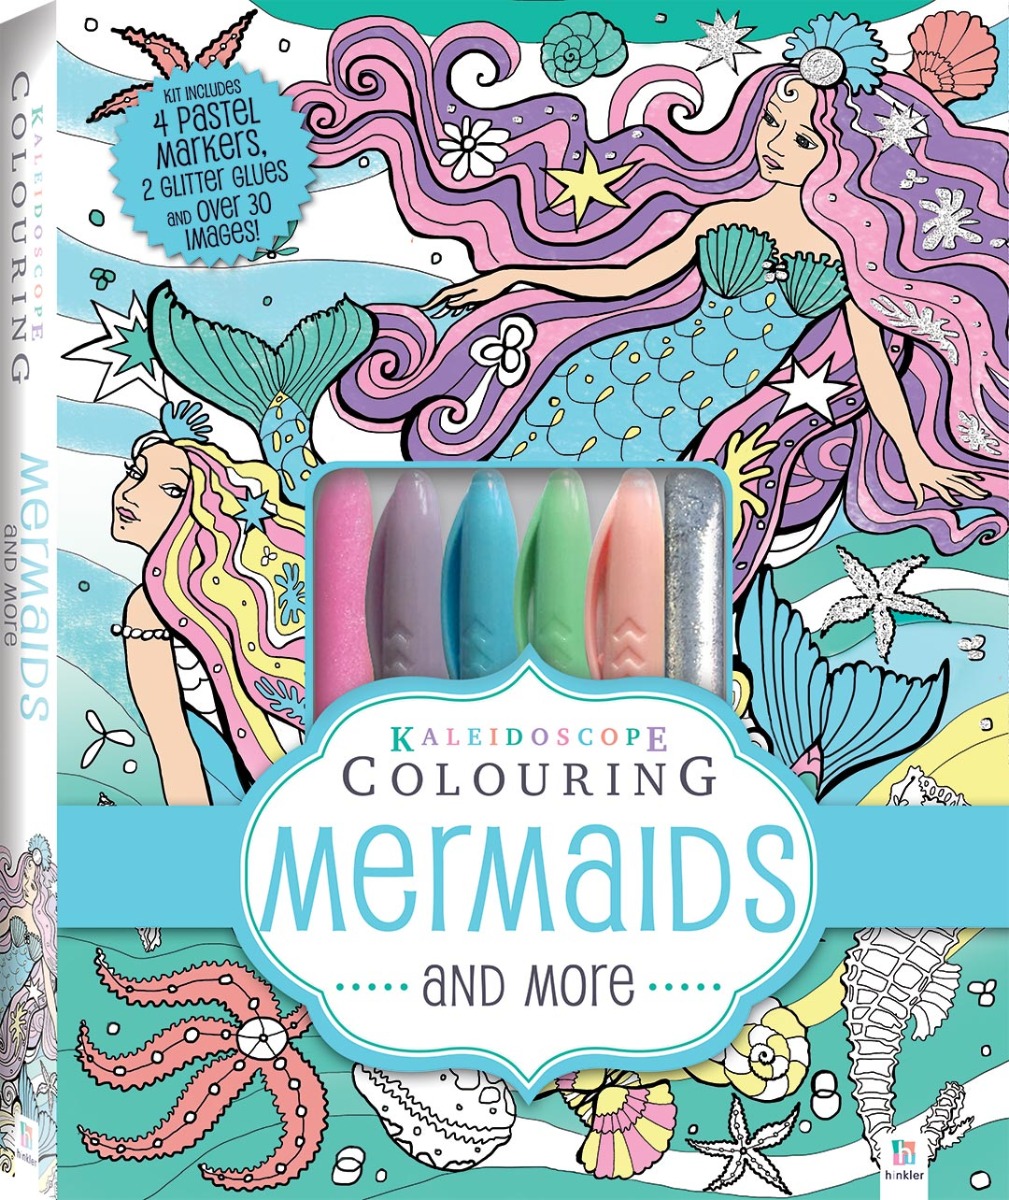 Kaleidoscope Colouring. Mermaids And More